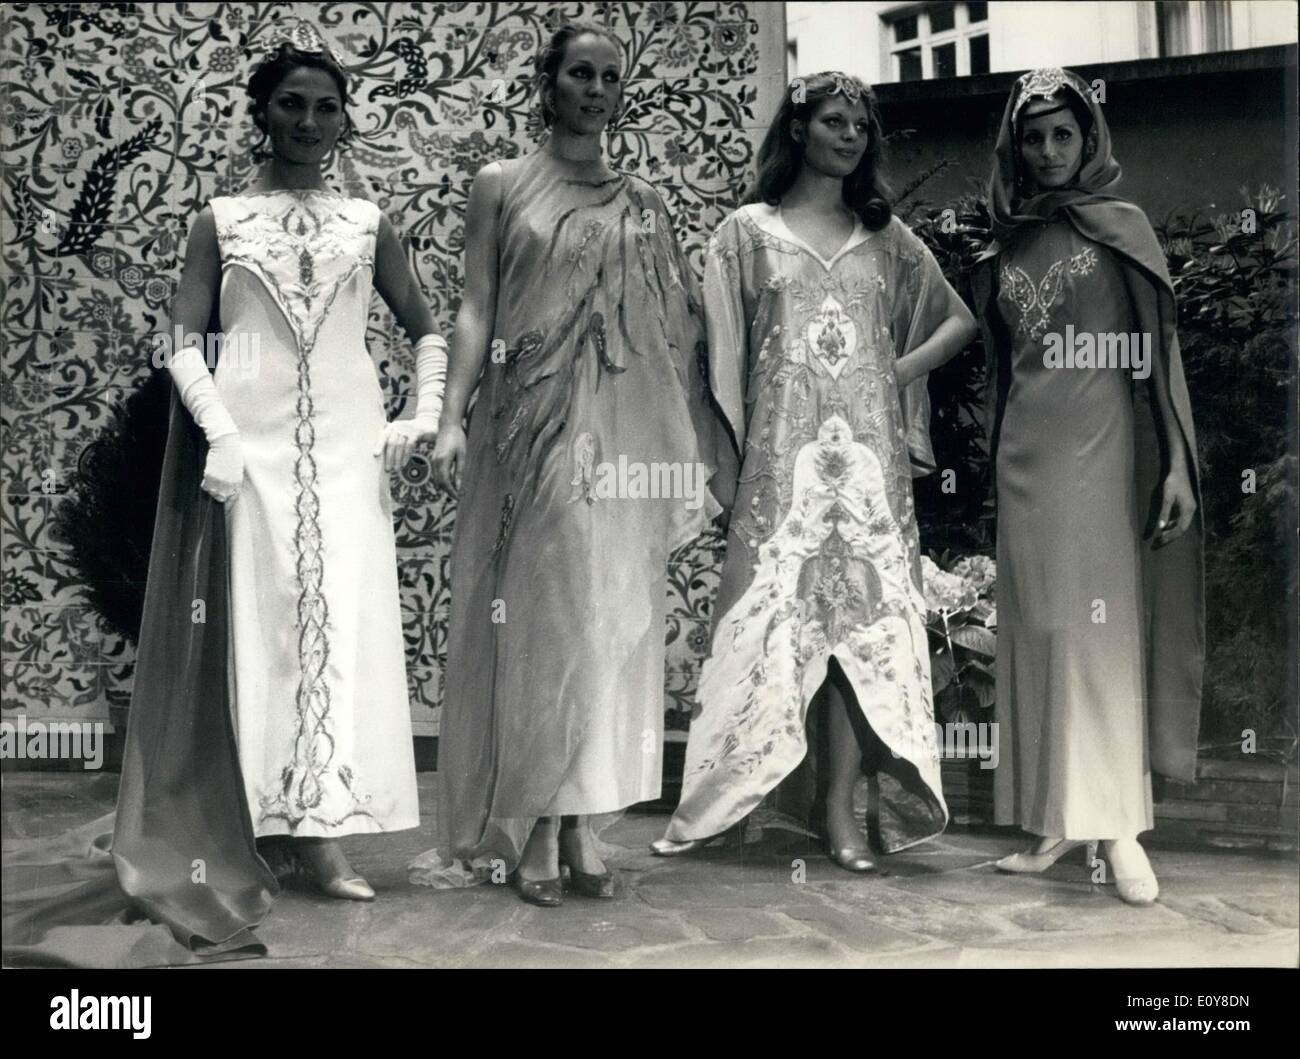 May 05, 1969 - Harem's fashion comes to Paris : Mrs. Zuhal yorgancioglu, famous Turkish fashion maker, Presented in Paris Many models inspired by clothes that used to wear women of Harem in Ottoman Palace. Photo shows Four Models of this Harm's fashion. Stock Photo